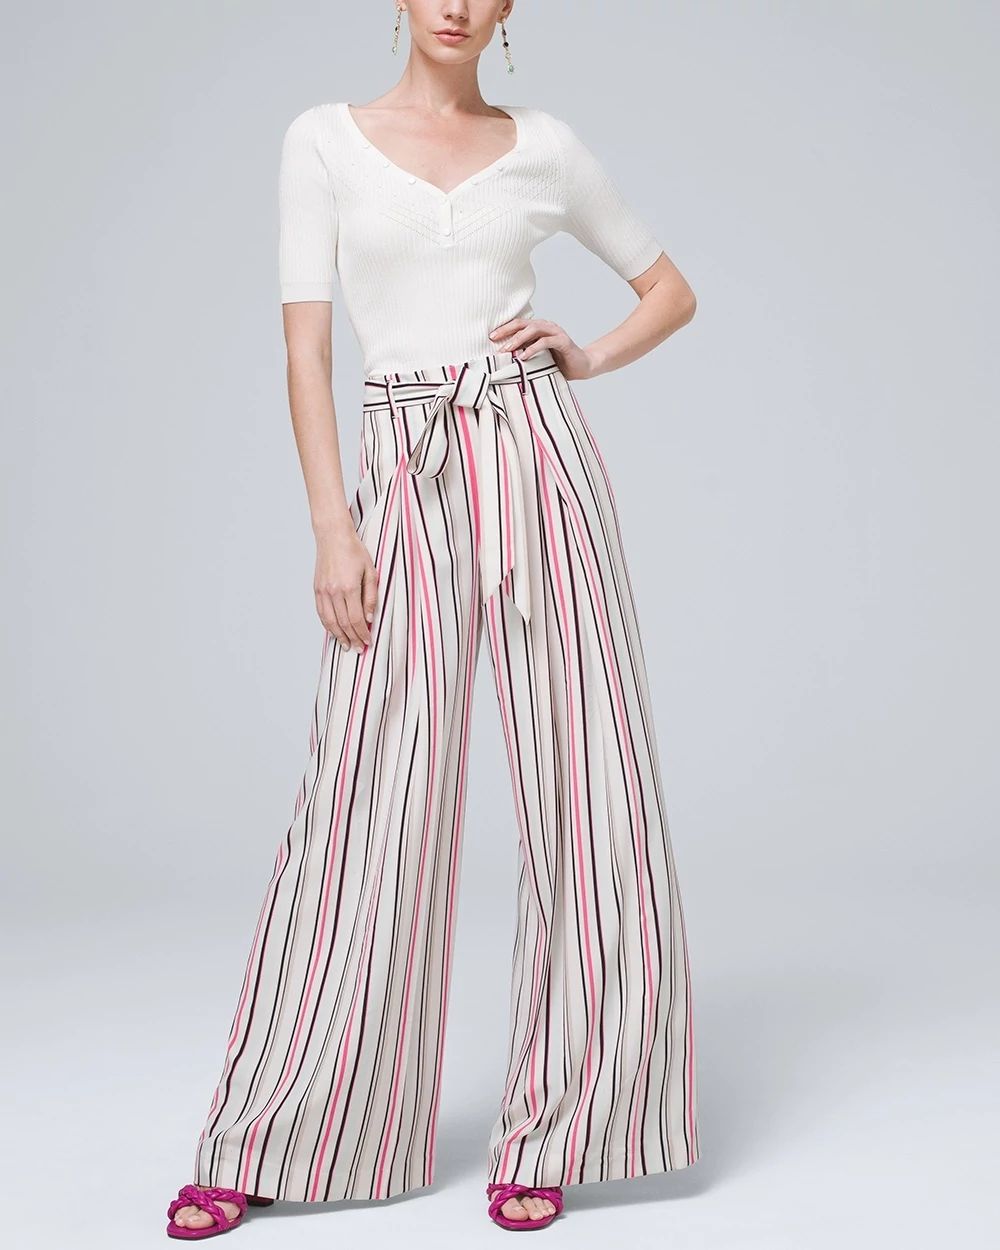 Striped Wide-Leg Side-Zip Pants click to view larger image.